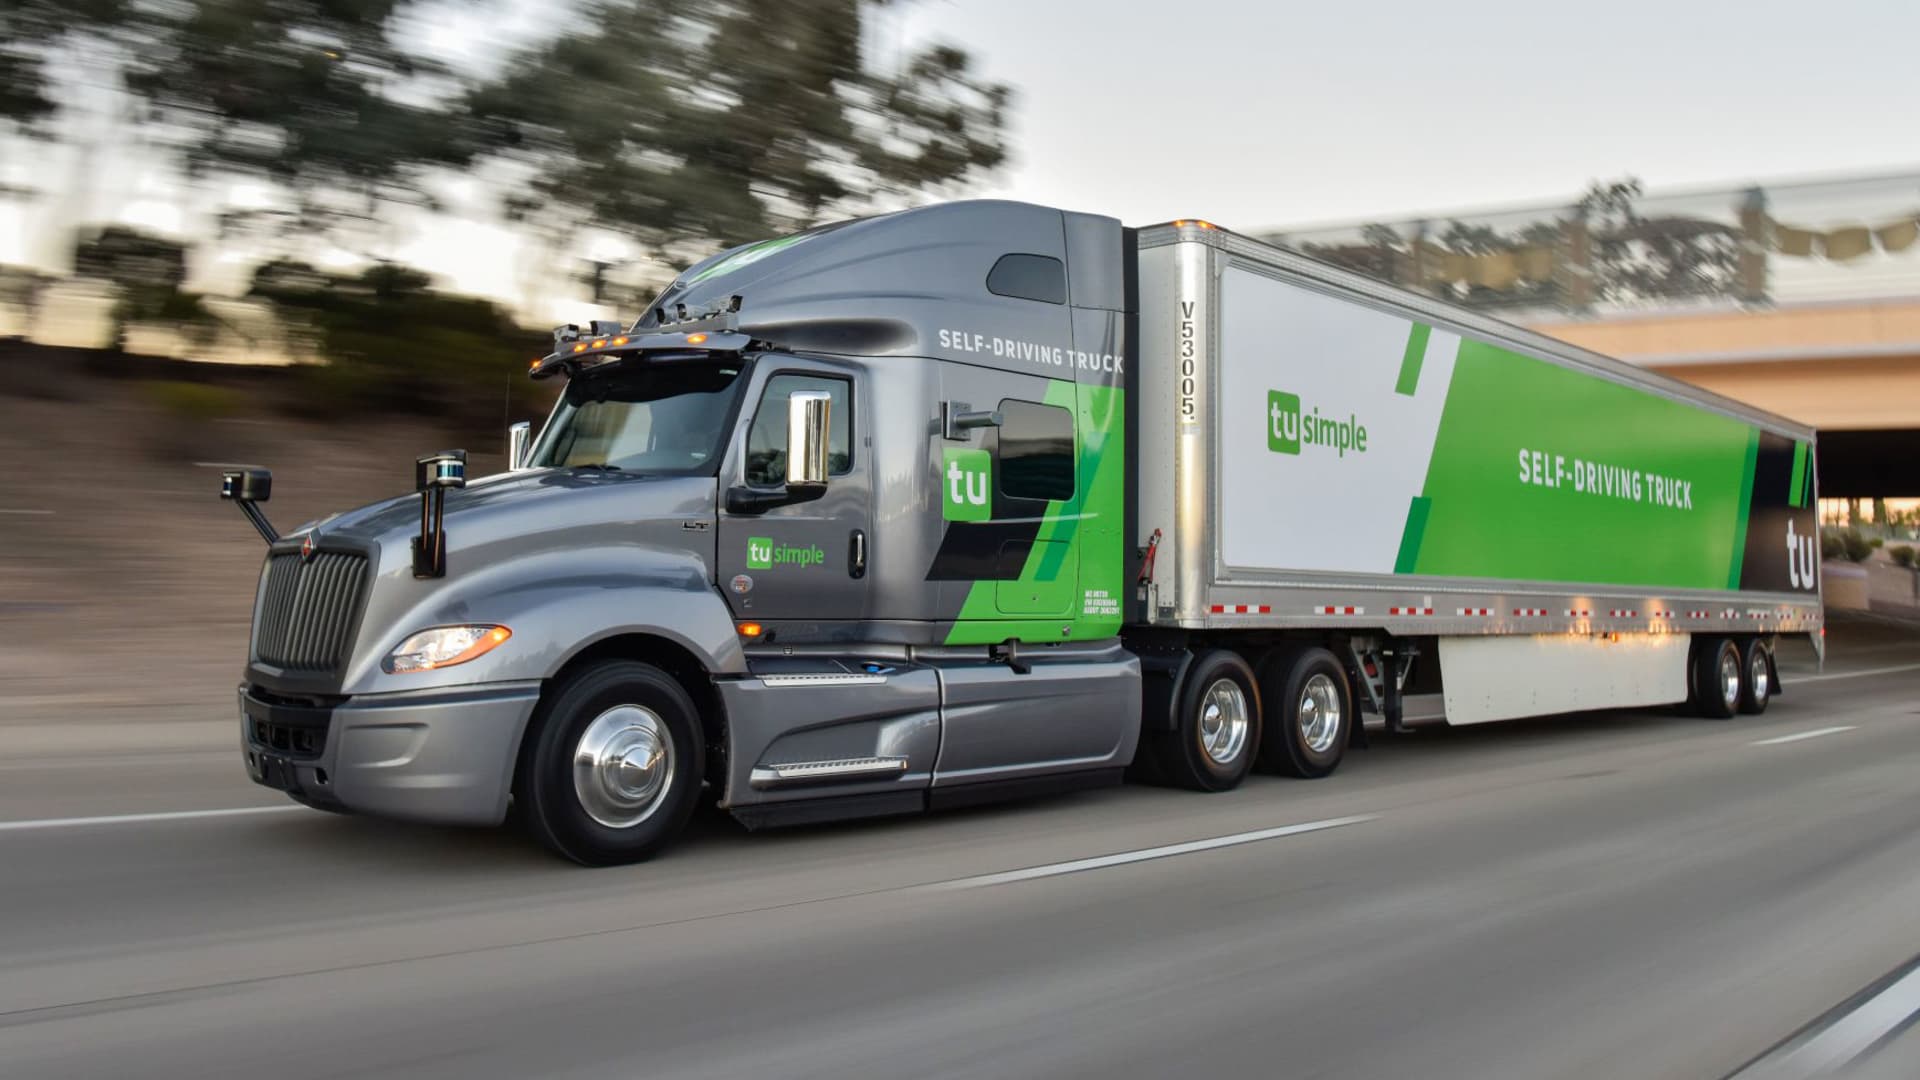 Self-driving truck startup TuSimple fired its CEO over improper ties to a Chinese firm